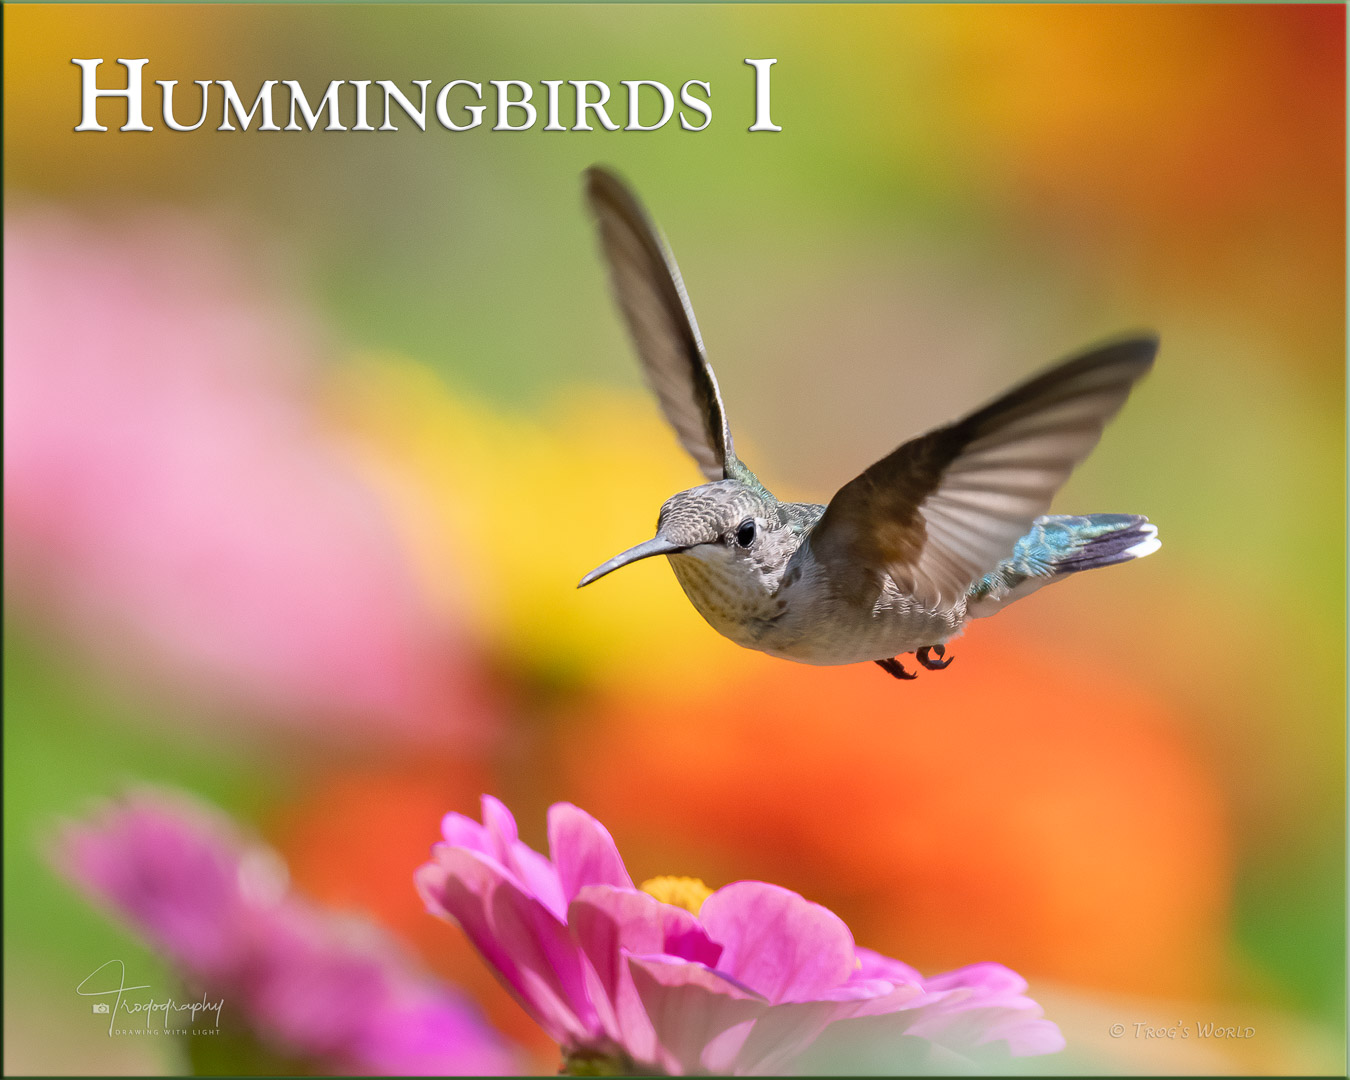 Ruby-throated Hummingbird hovers among the flowers